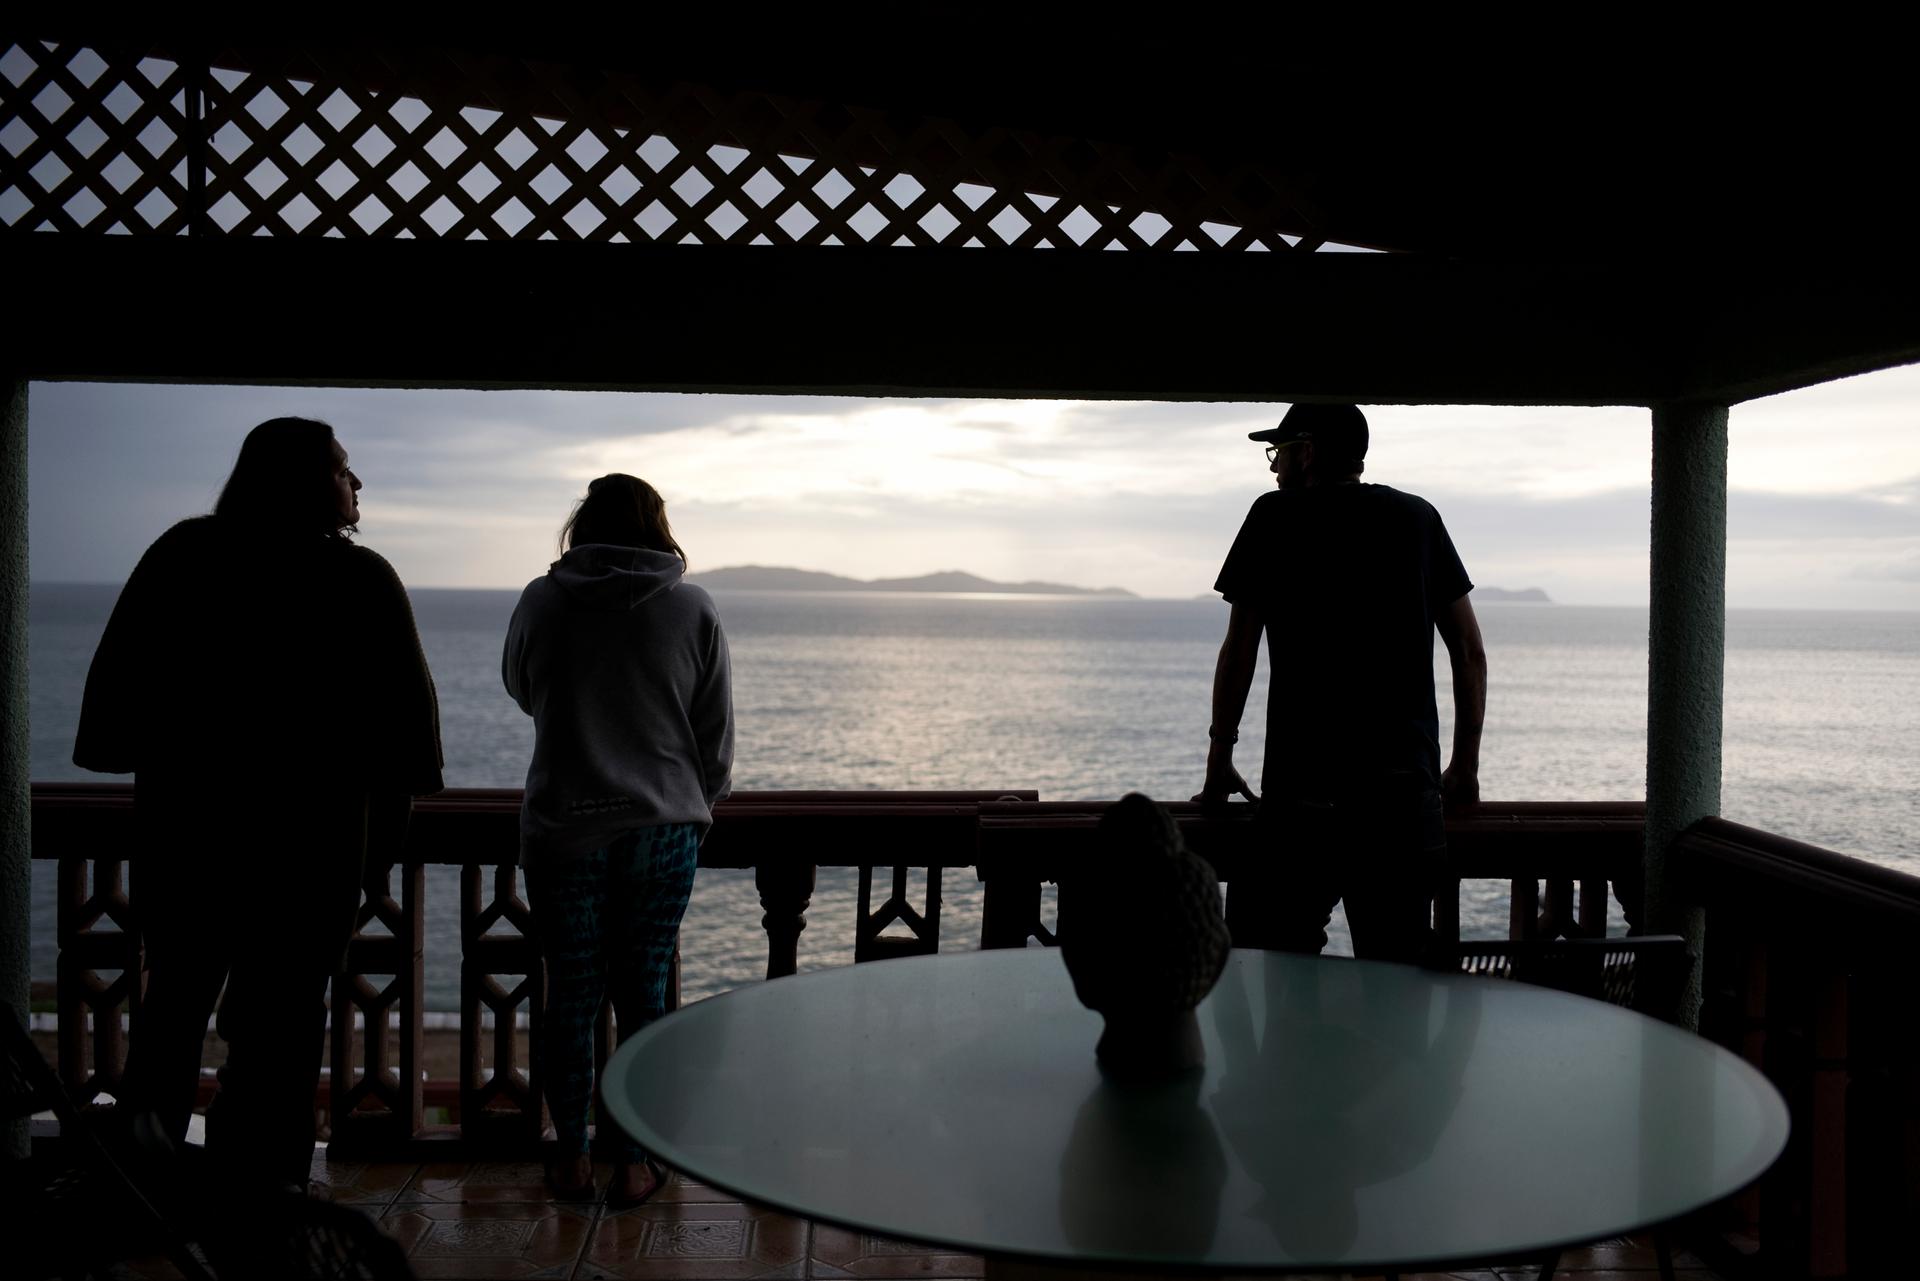 Staff at The Ibogaine Institute, an opioid rehab clinic, look at whales swimming off the Baja coast